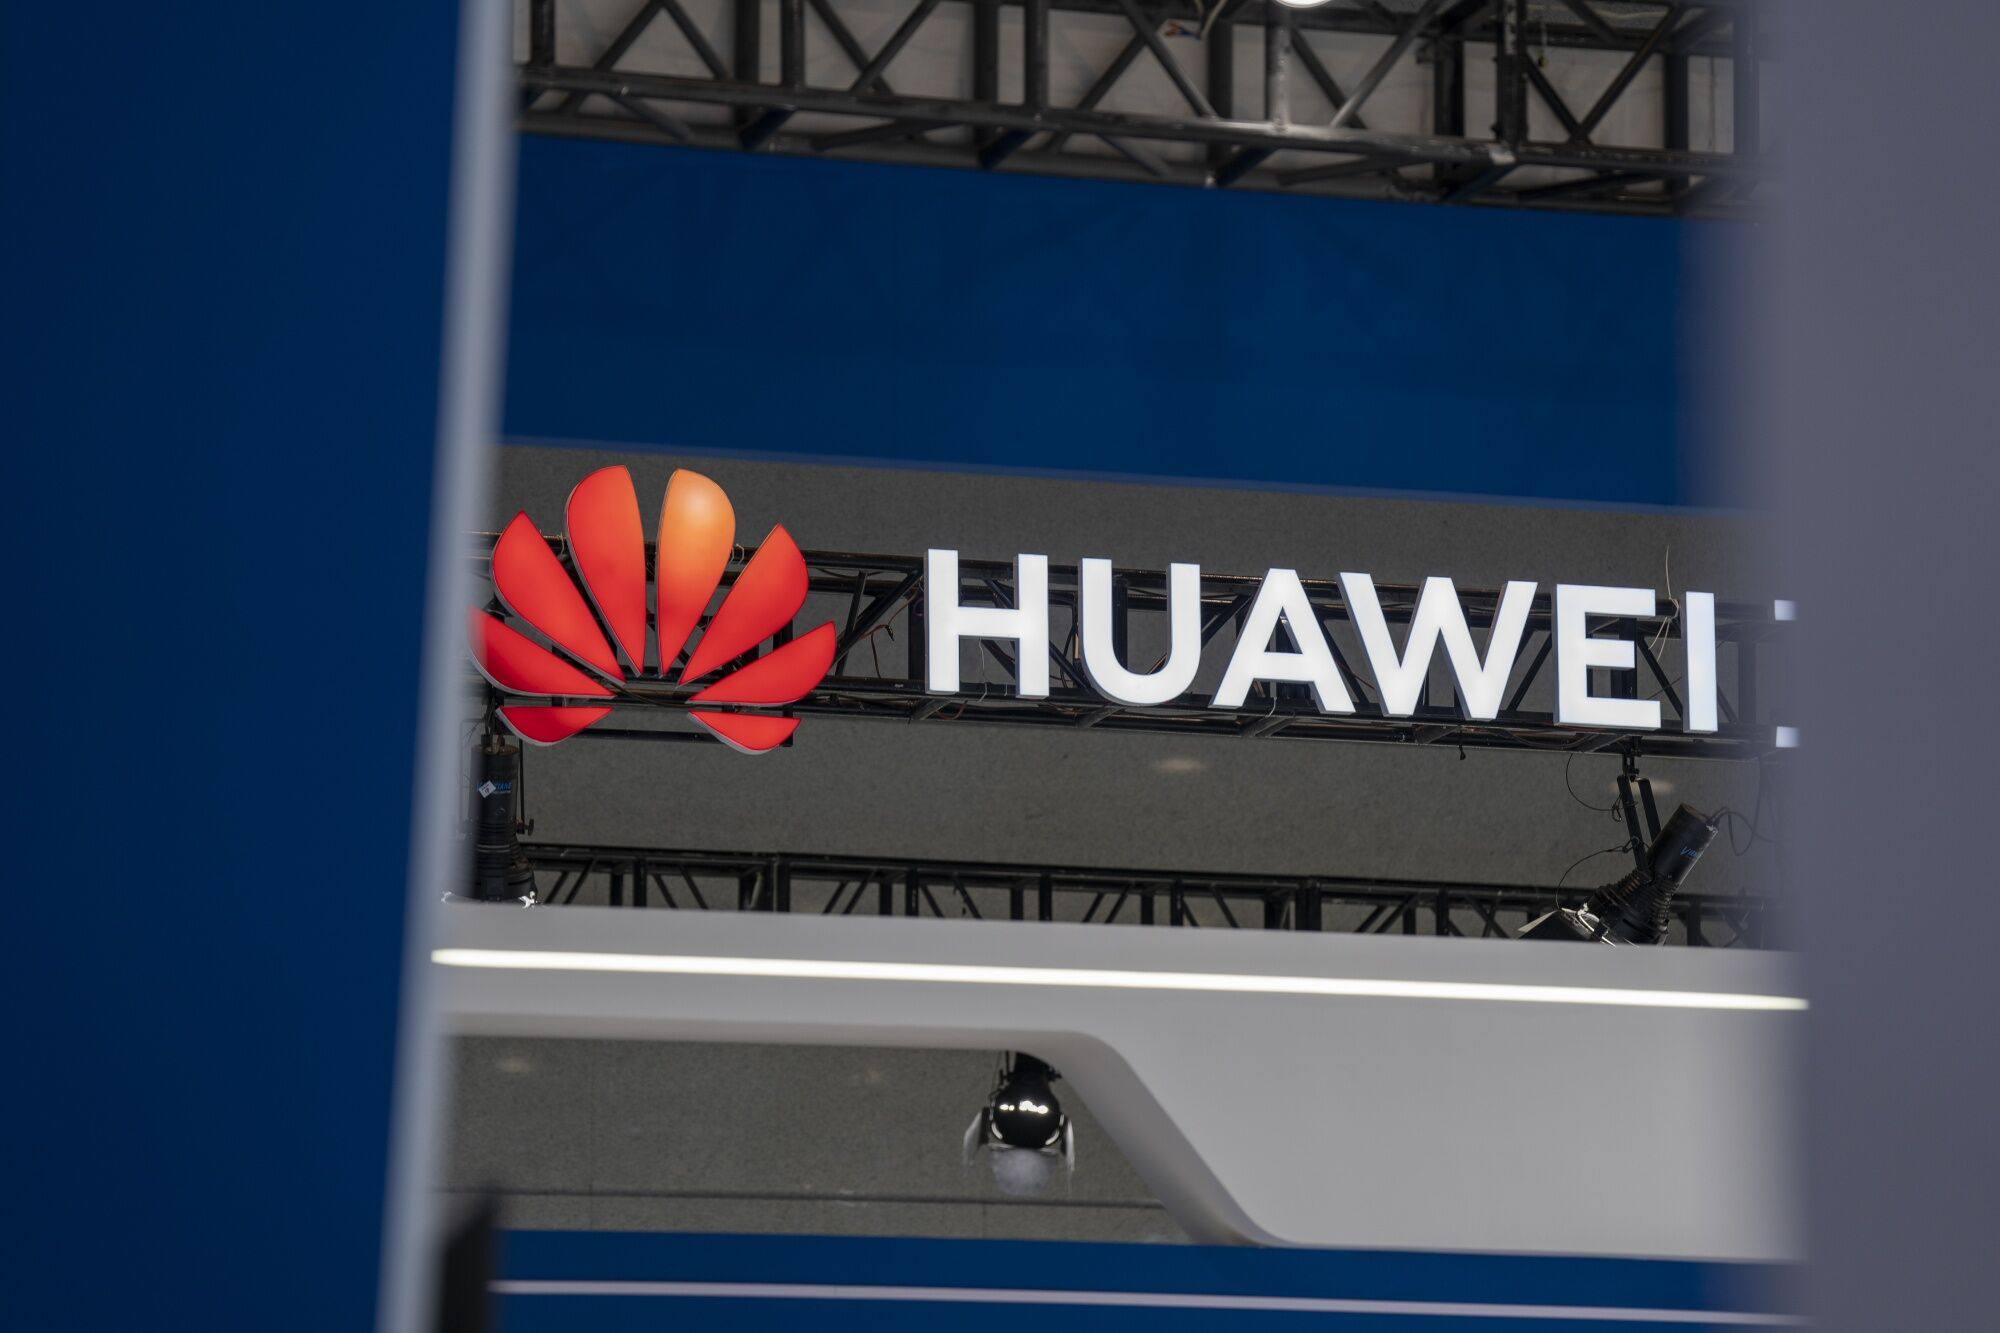 An ASML employee accused of data theft had left for Huawei, according to a Dutch media report. Photo: Bloomberg